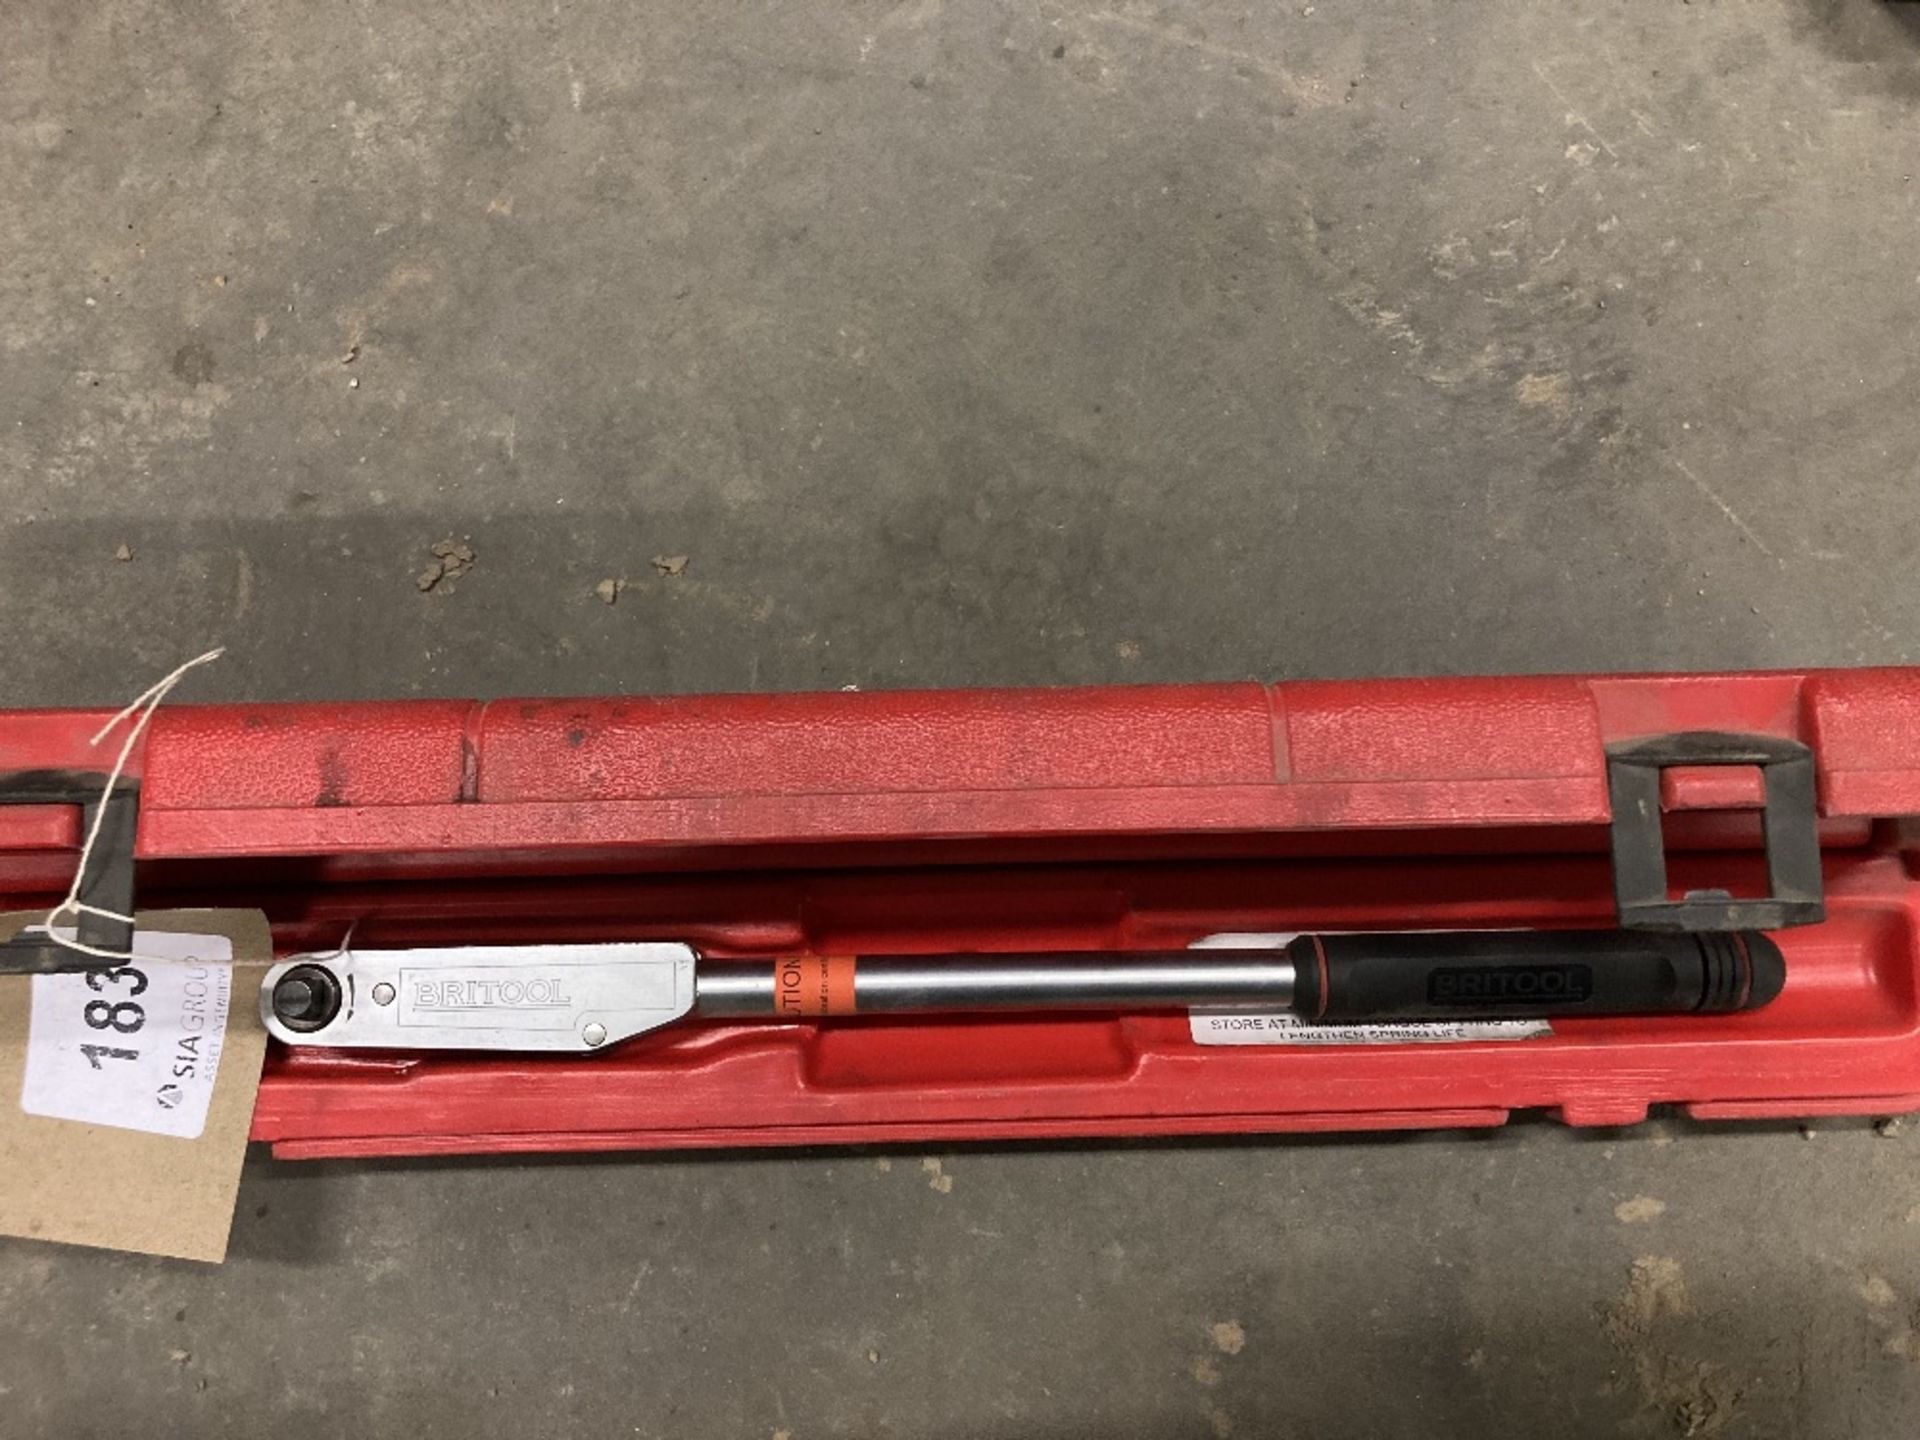 Britool AVT300A torque wrench with plastic carry case - Image 4 of 4